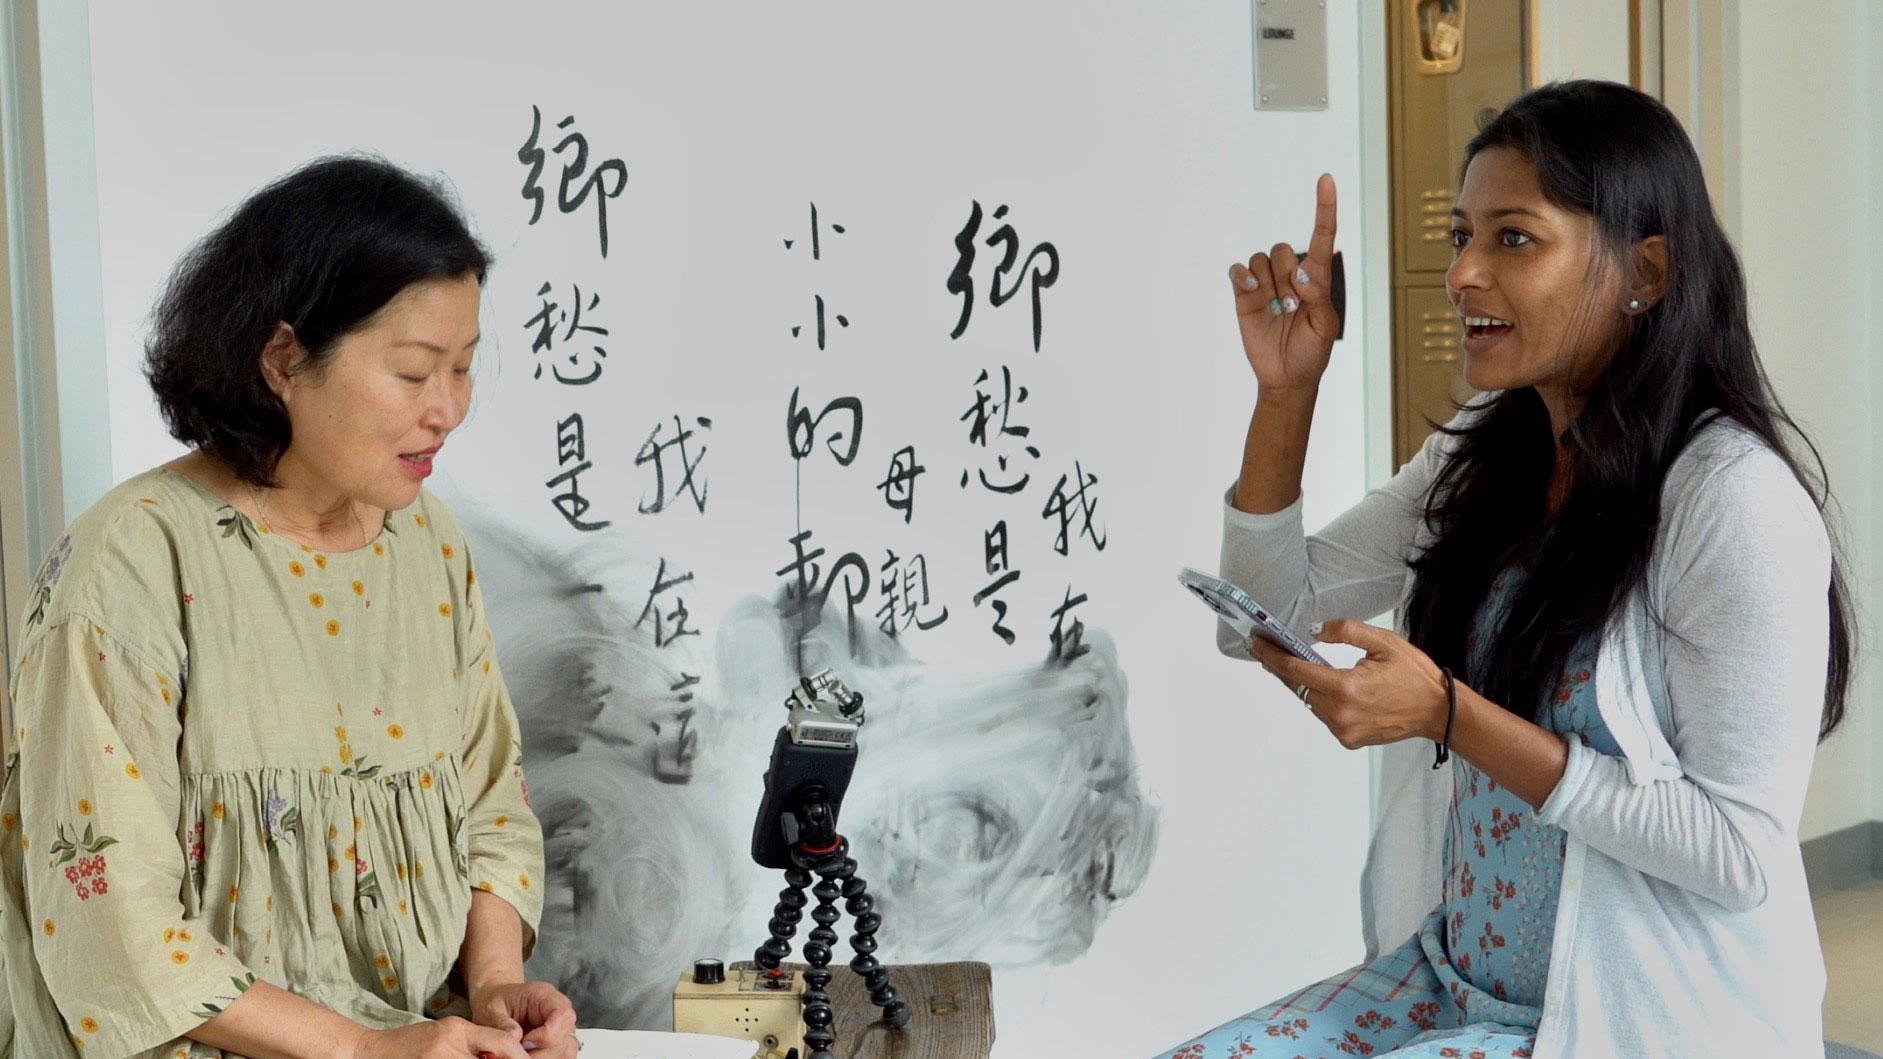 Taiwan-born artist Wen-hao Tien (left) started inviting people from around the world to teach her songs from their homelands as part her exhibit on immigration experiences at an art center in Boston, Massachusetts. 